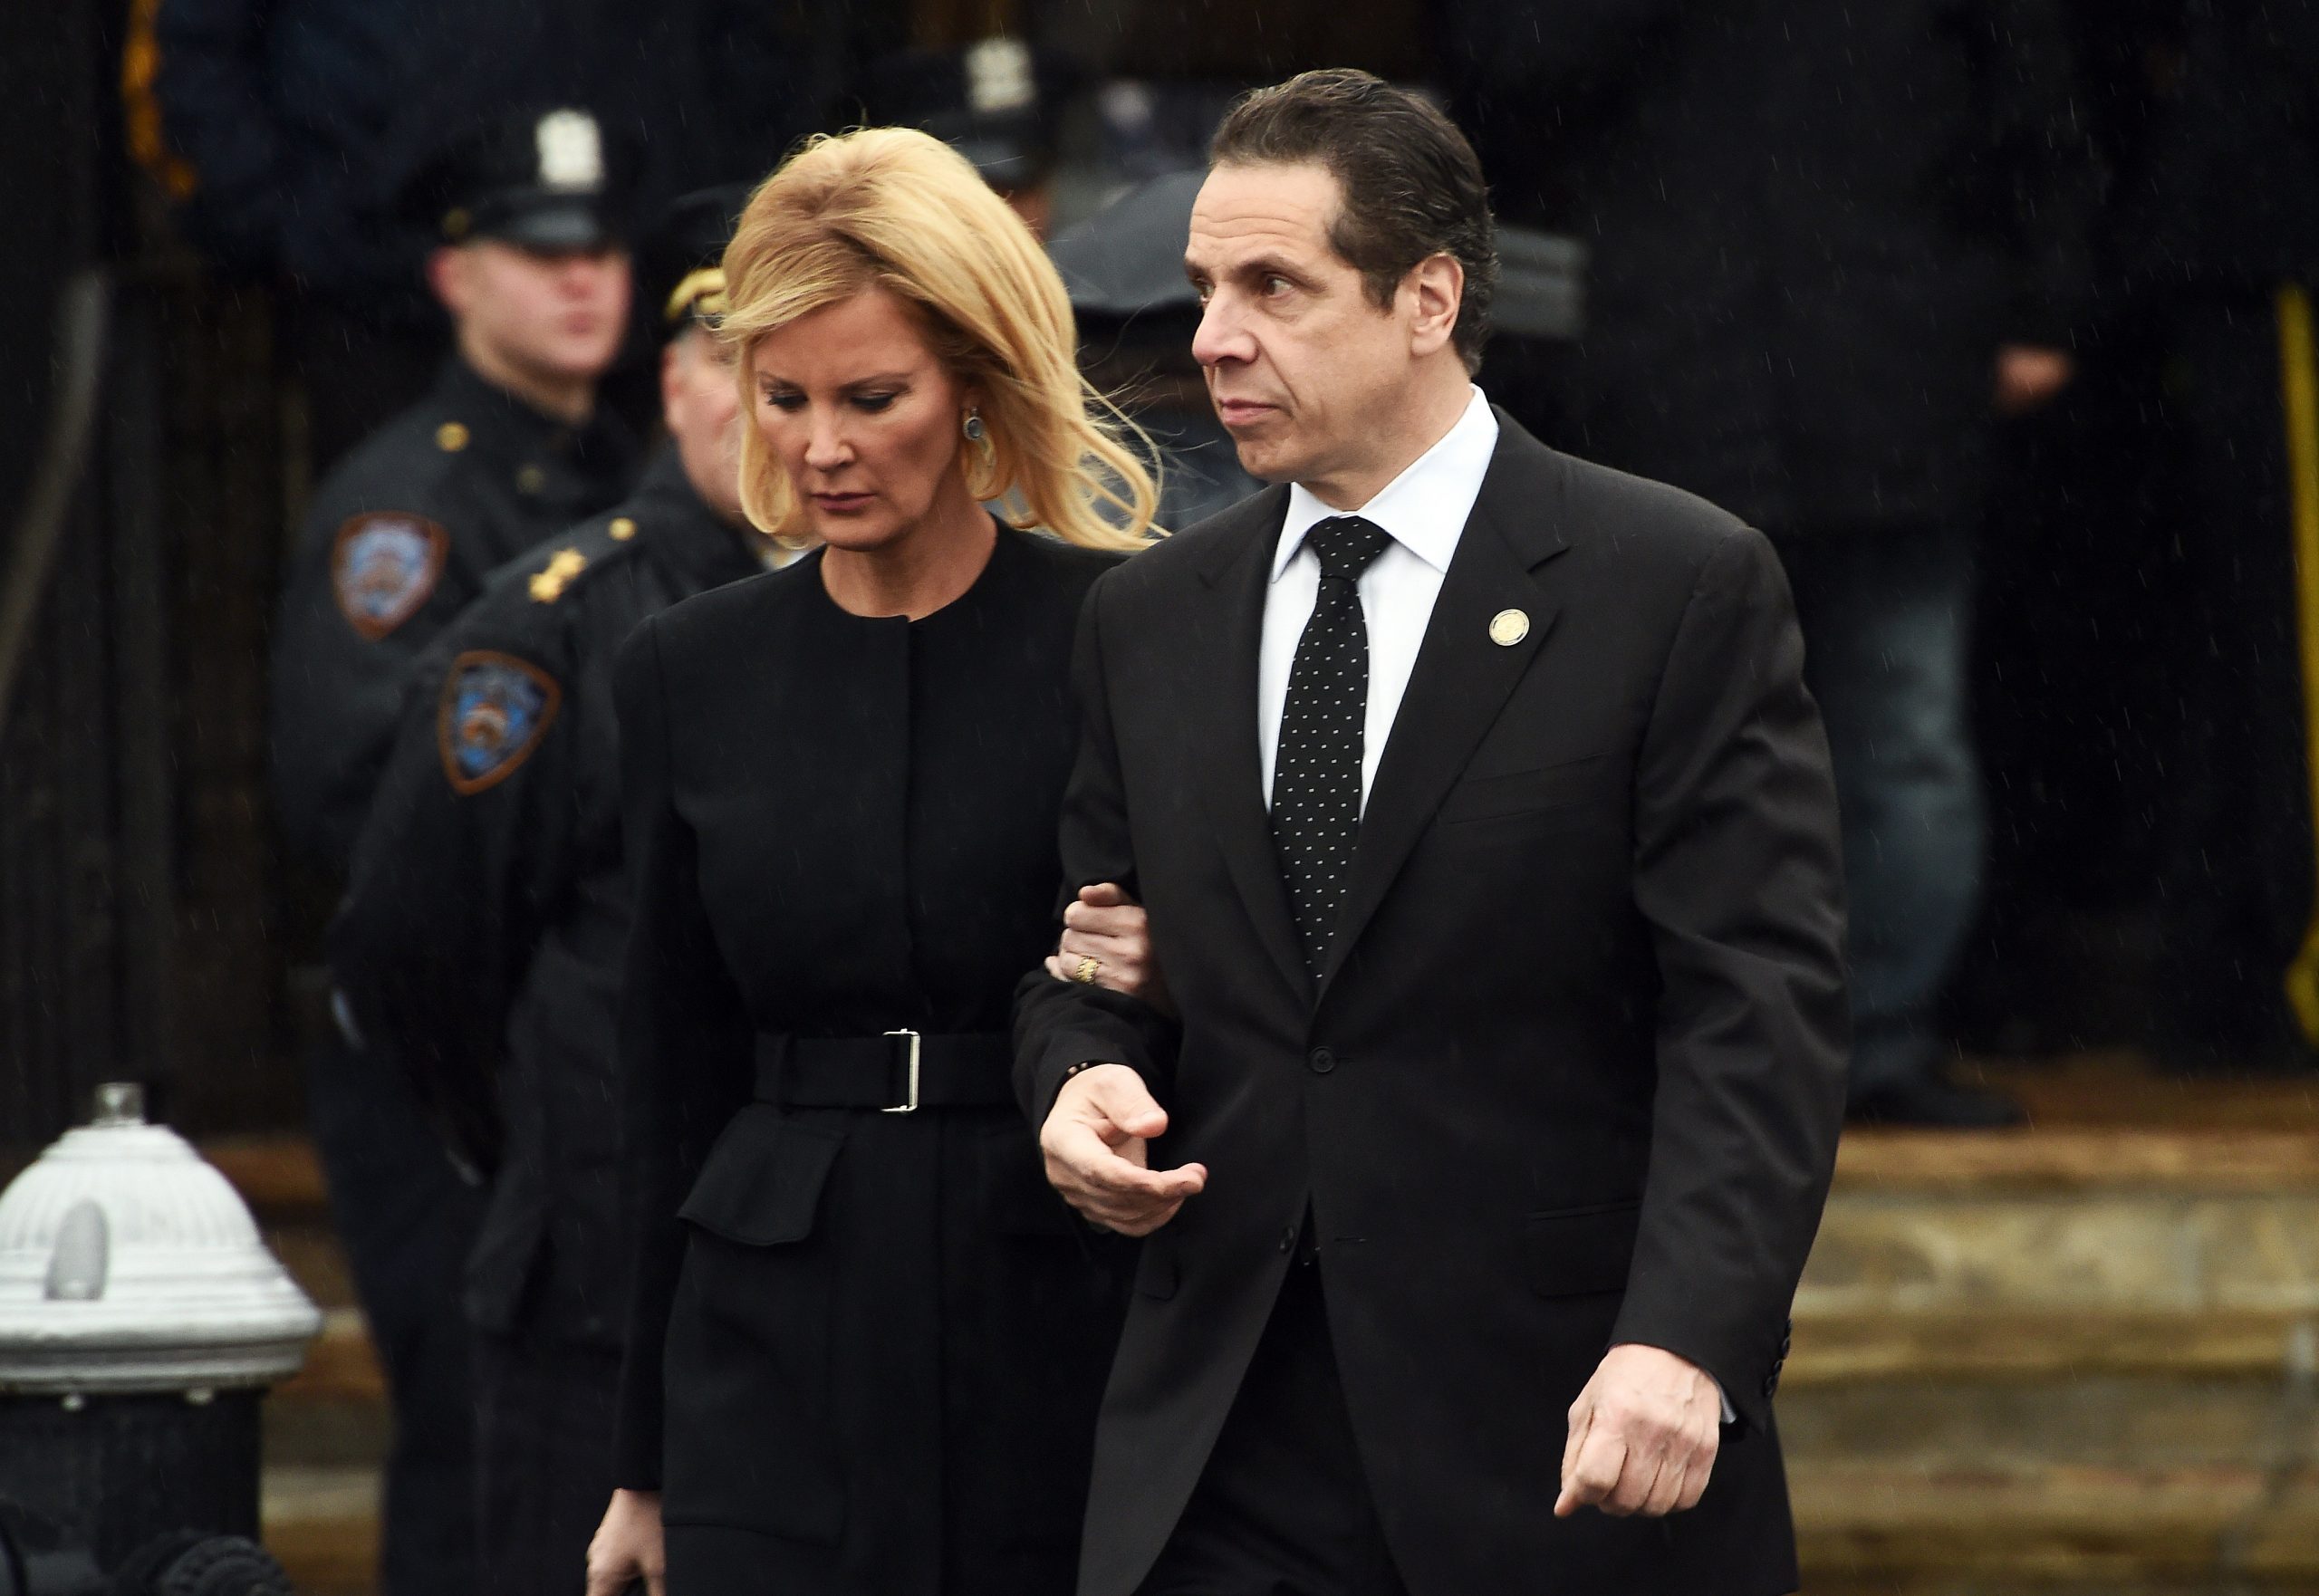 Andrew Cuomo and Sandra Lee: Who Has the Higher Net Worth?